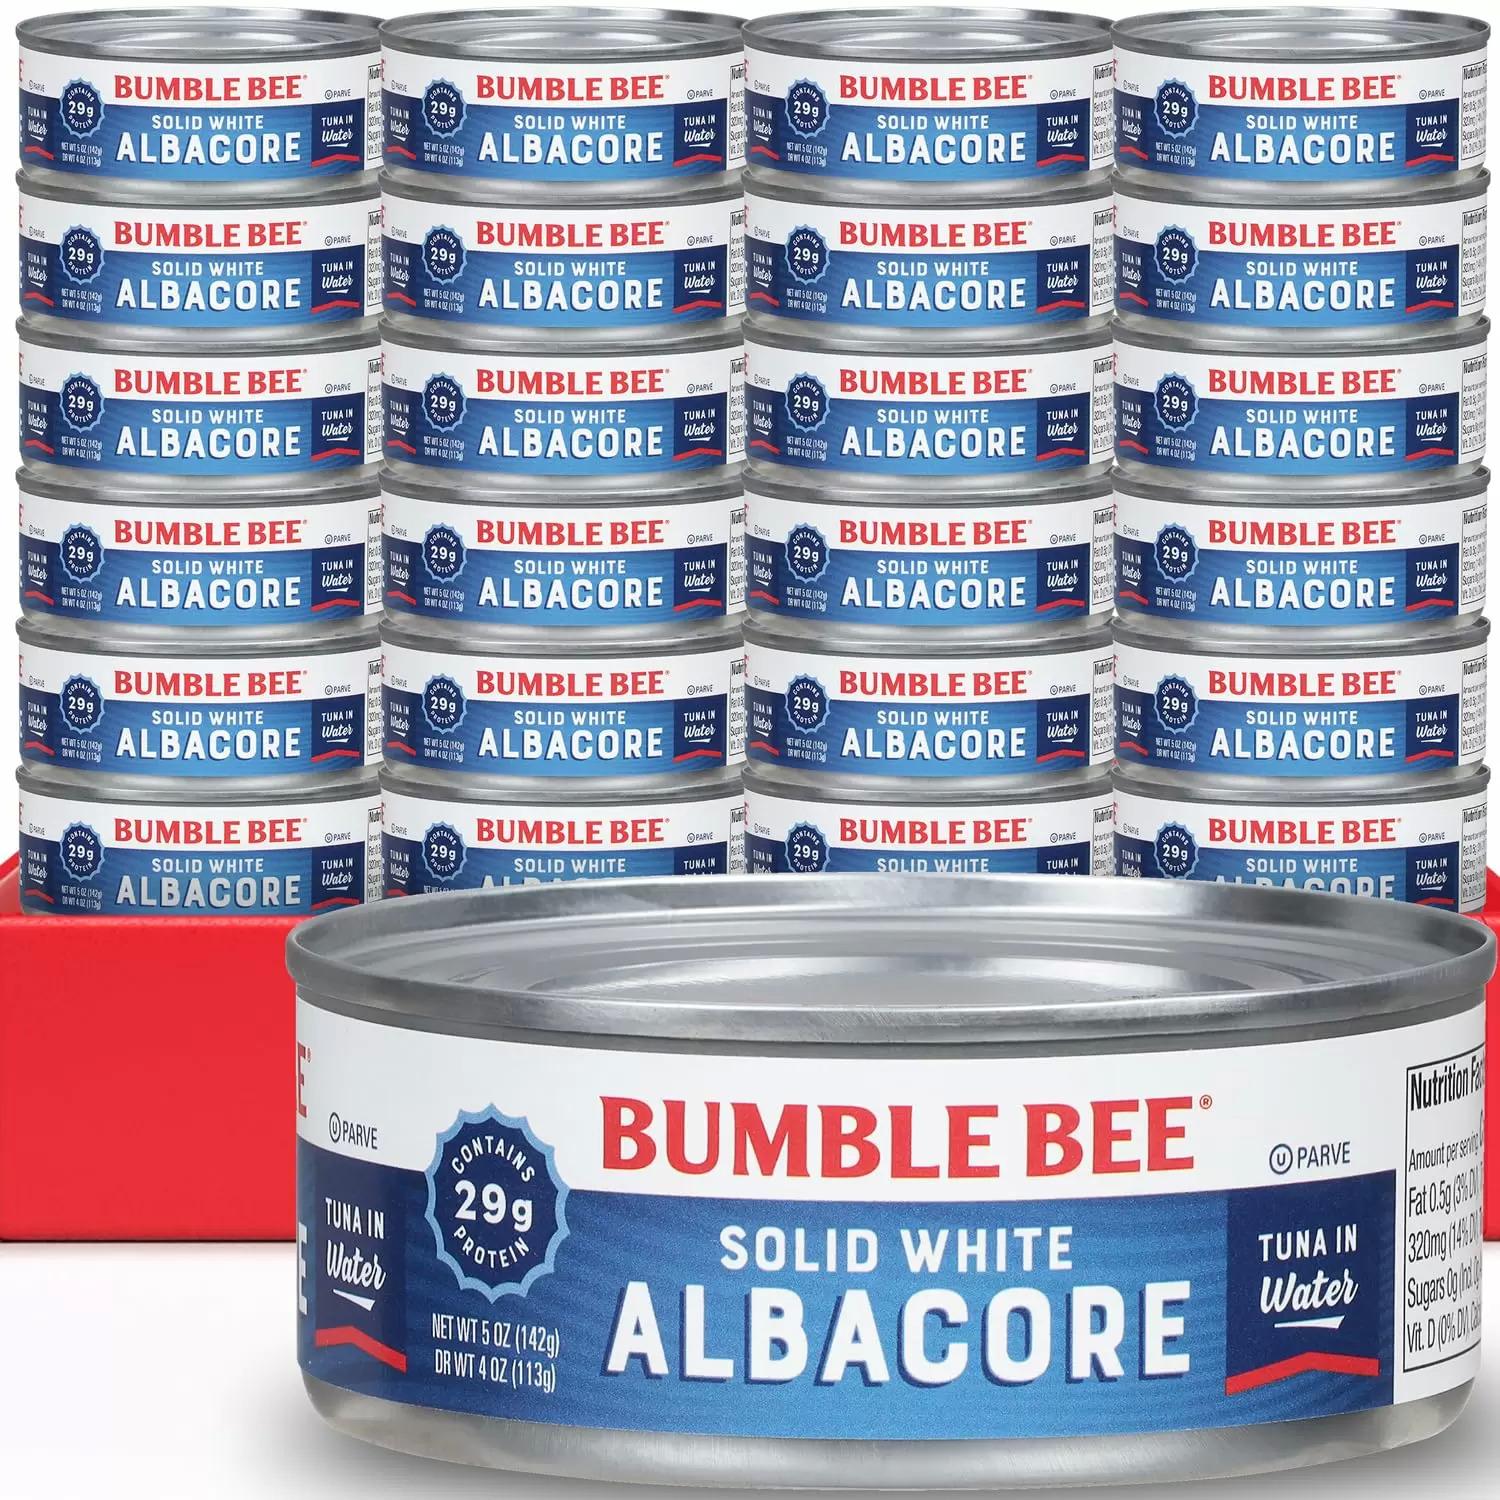 Bumble Bee Solid White Albacore Tuna in Water 24 Pack for $24.86